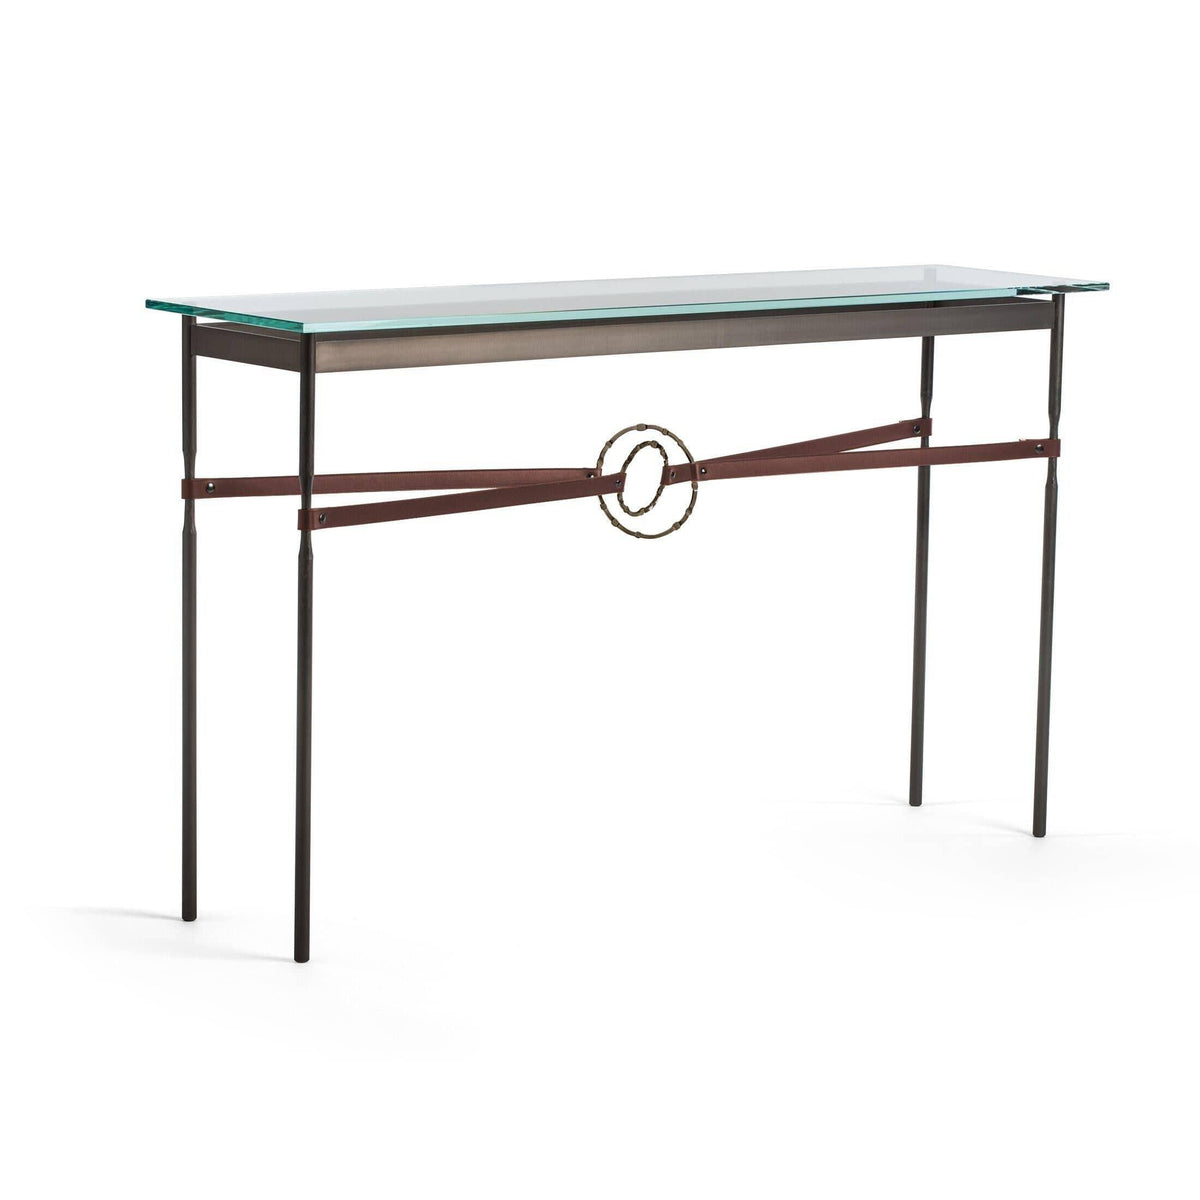 Hubbardton Forge - Equus Brown Leather Console Table - 750118-07-05-LB-VA0714 | Montreal Lighting & Hardware